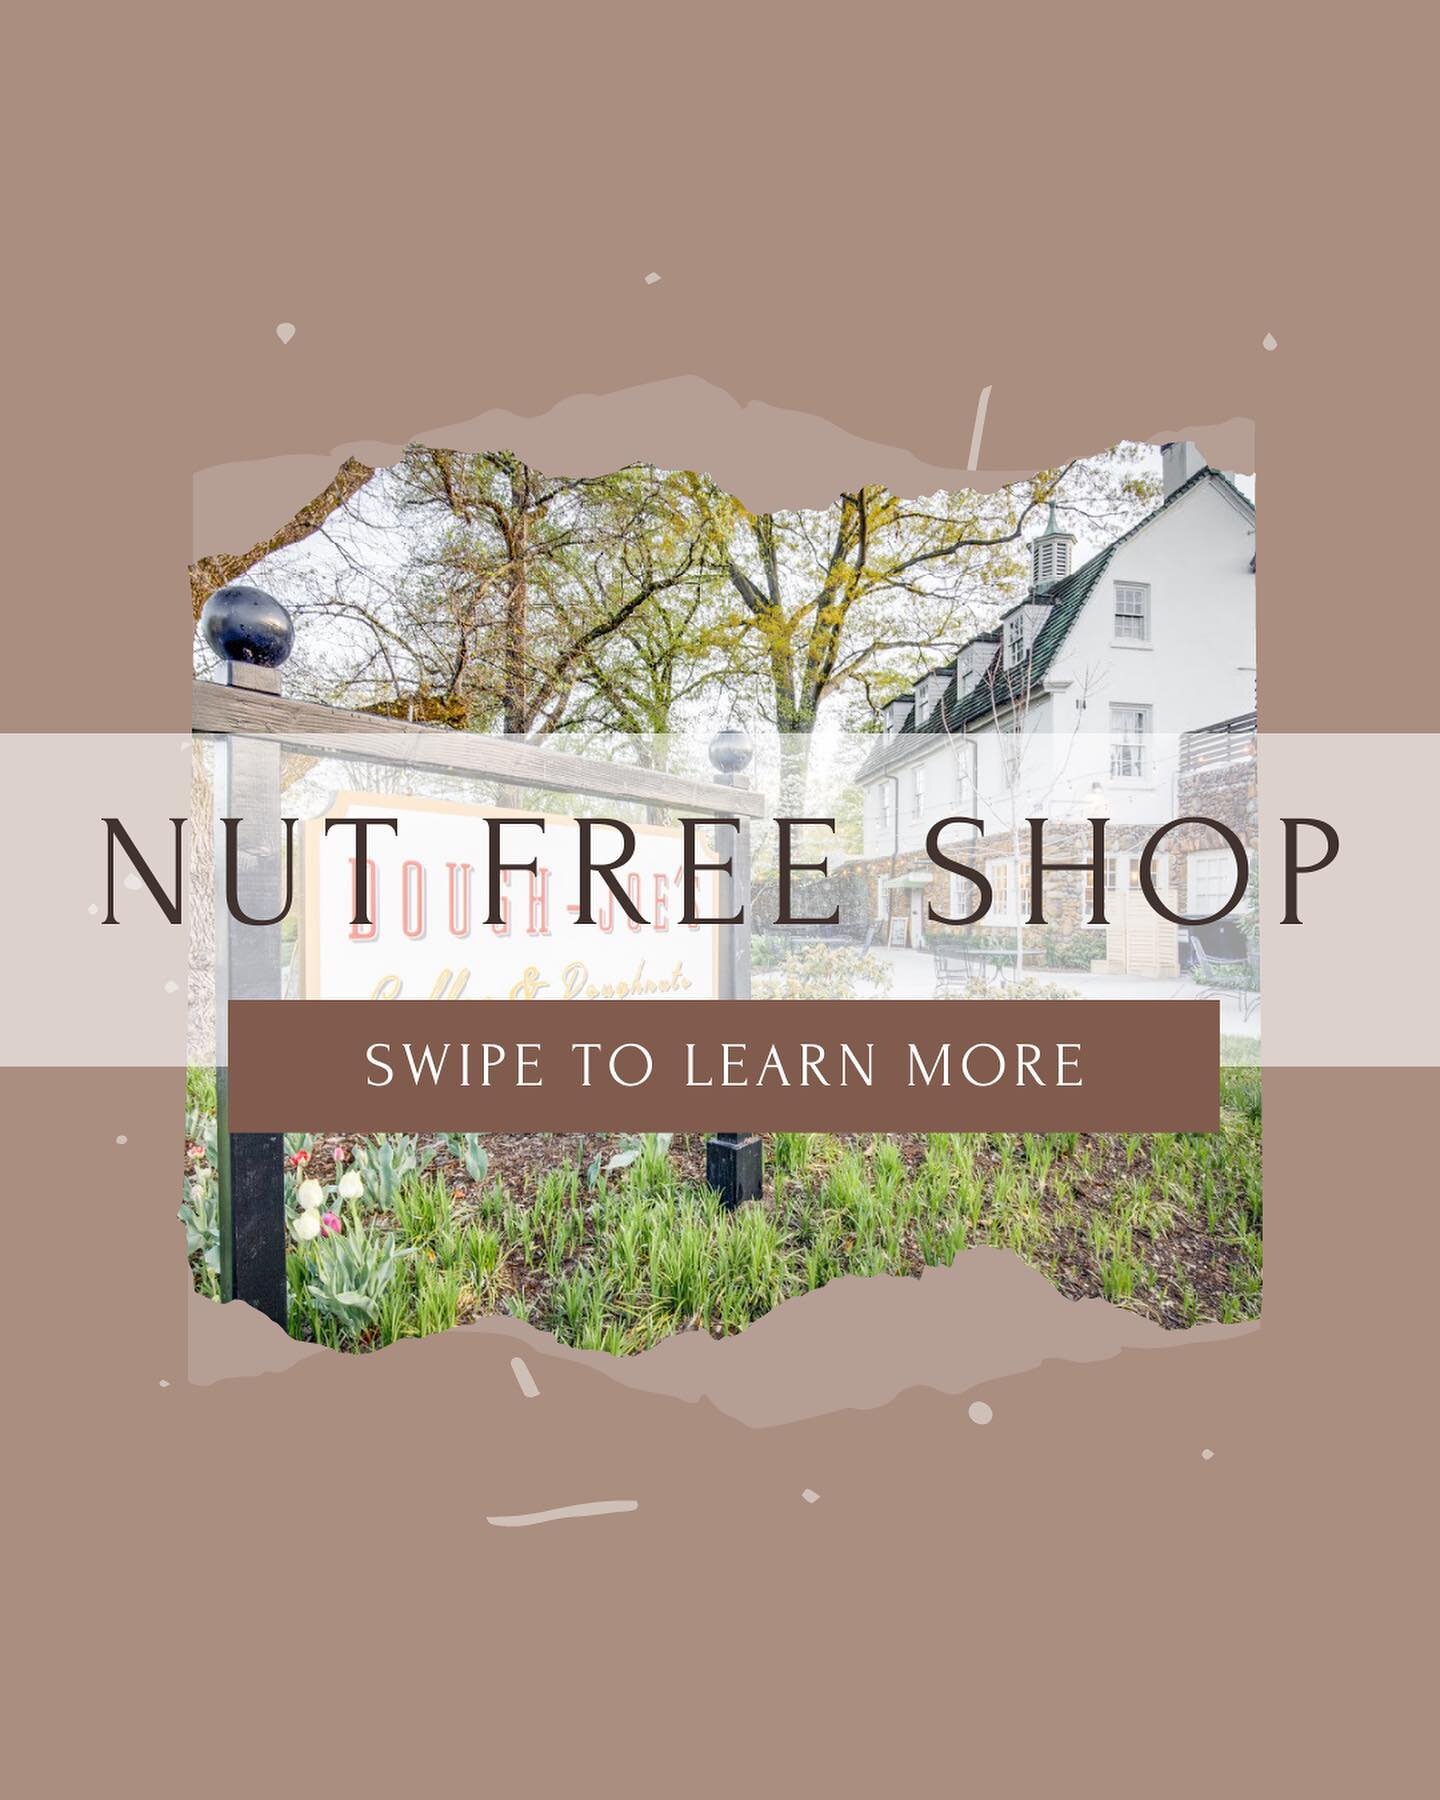 When we operated our food truck, we committed to being completely nut free. Years later, we have kept that commitment in our shop. We are proud to offer an 100% nut free environment for all of our customers with nut allergies. Swipe to learn what tha